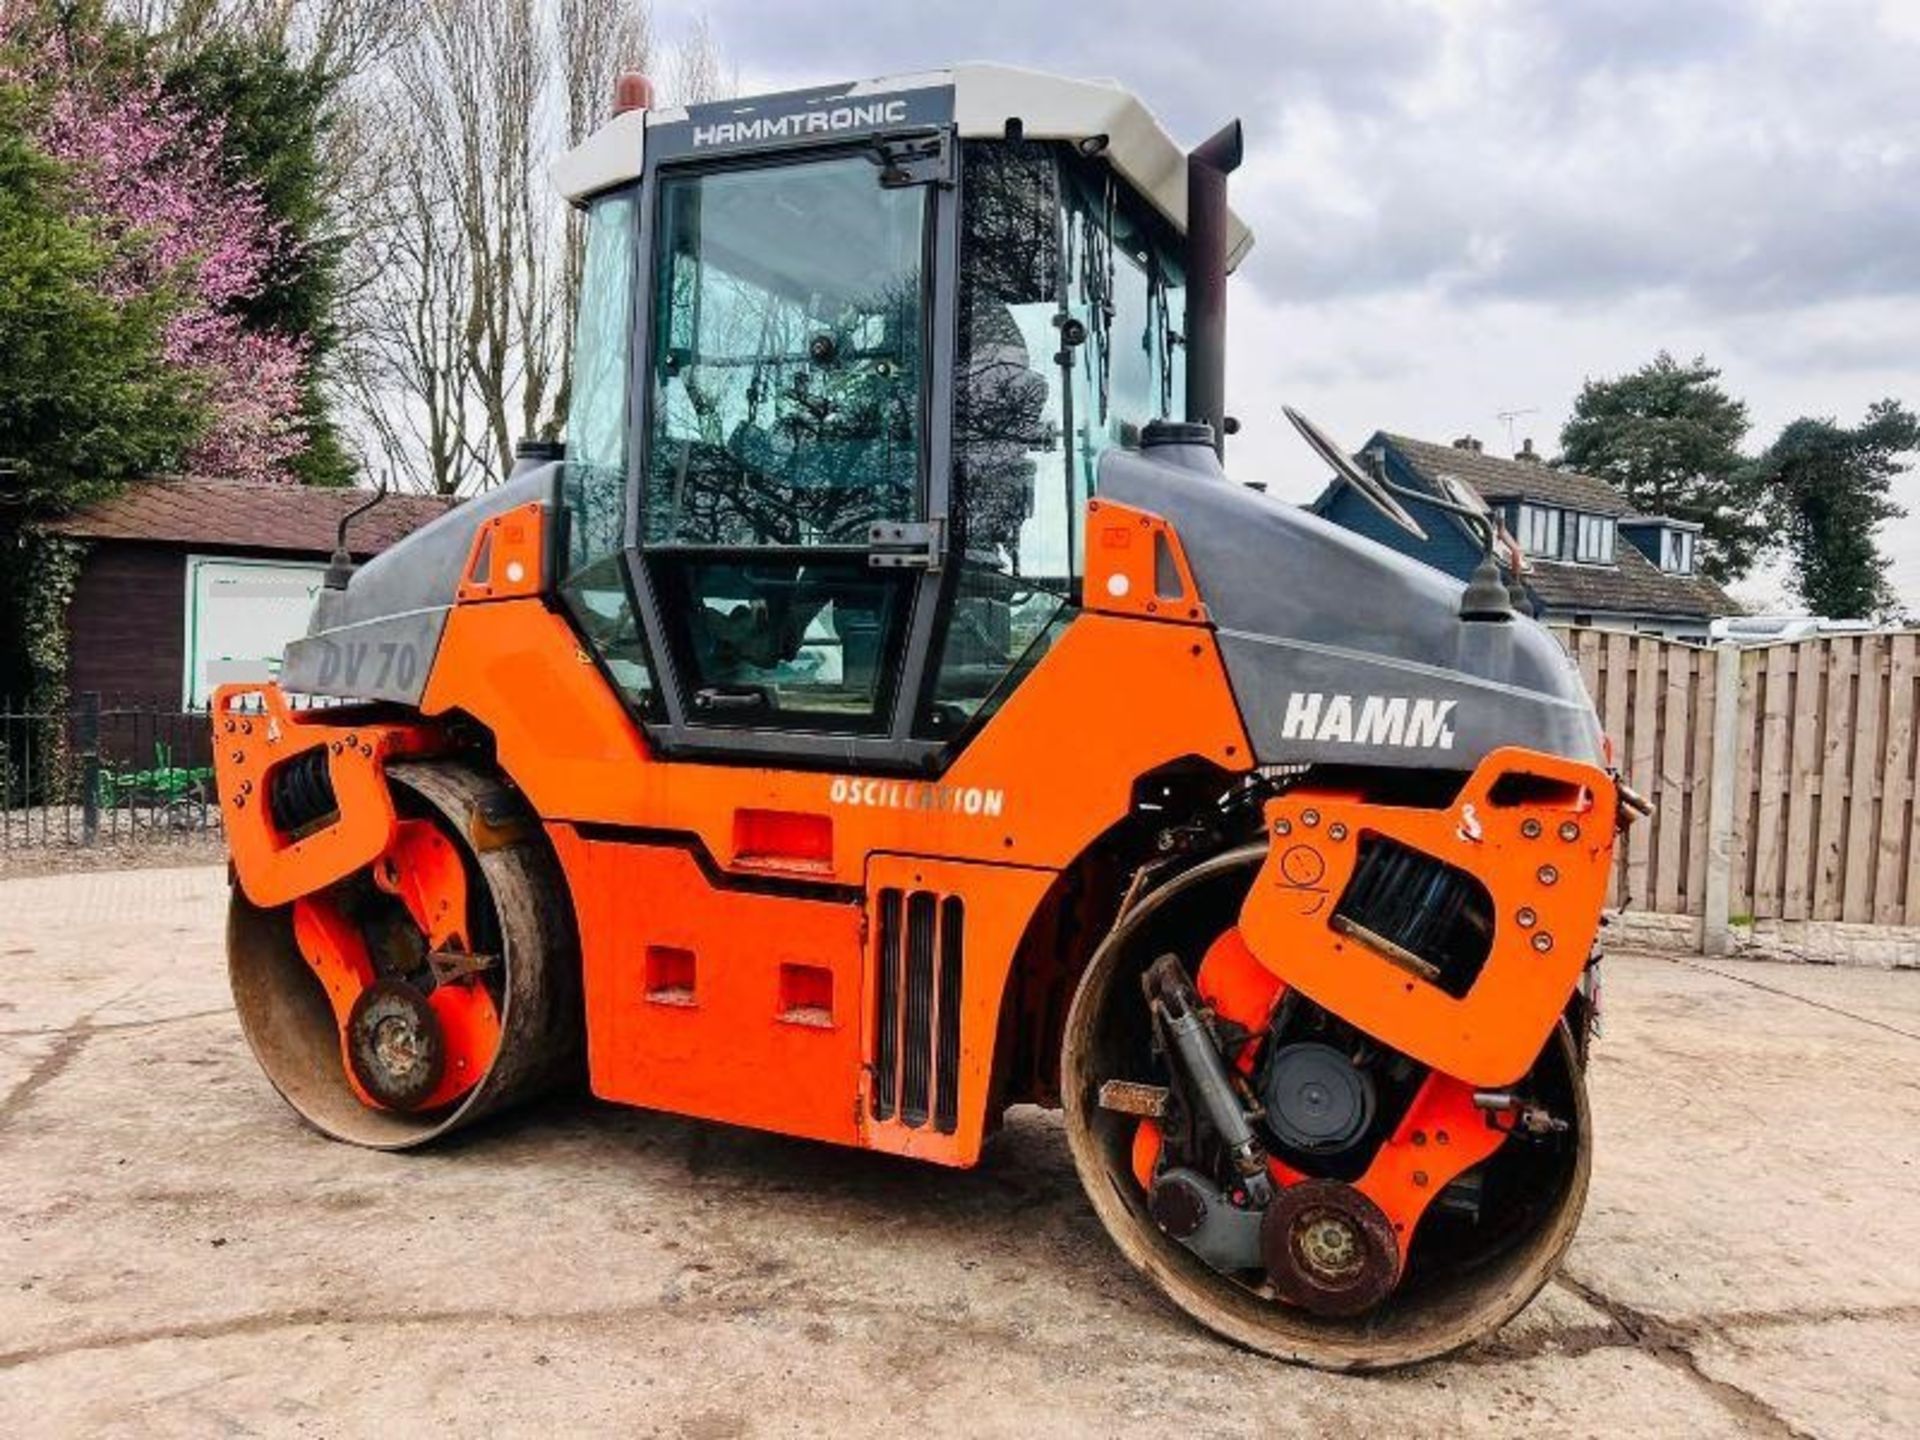 HAM DV70 DOUBLE DRUM ROLLER * 3025 HOURS * C/W TARMAC CUTTER - Image 18 of 19